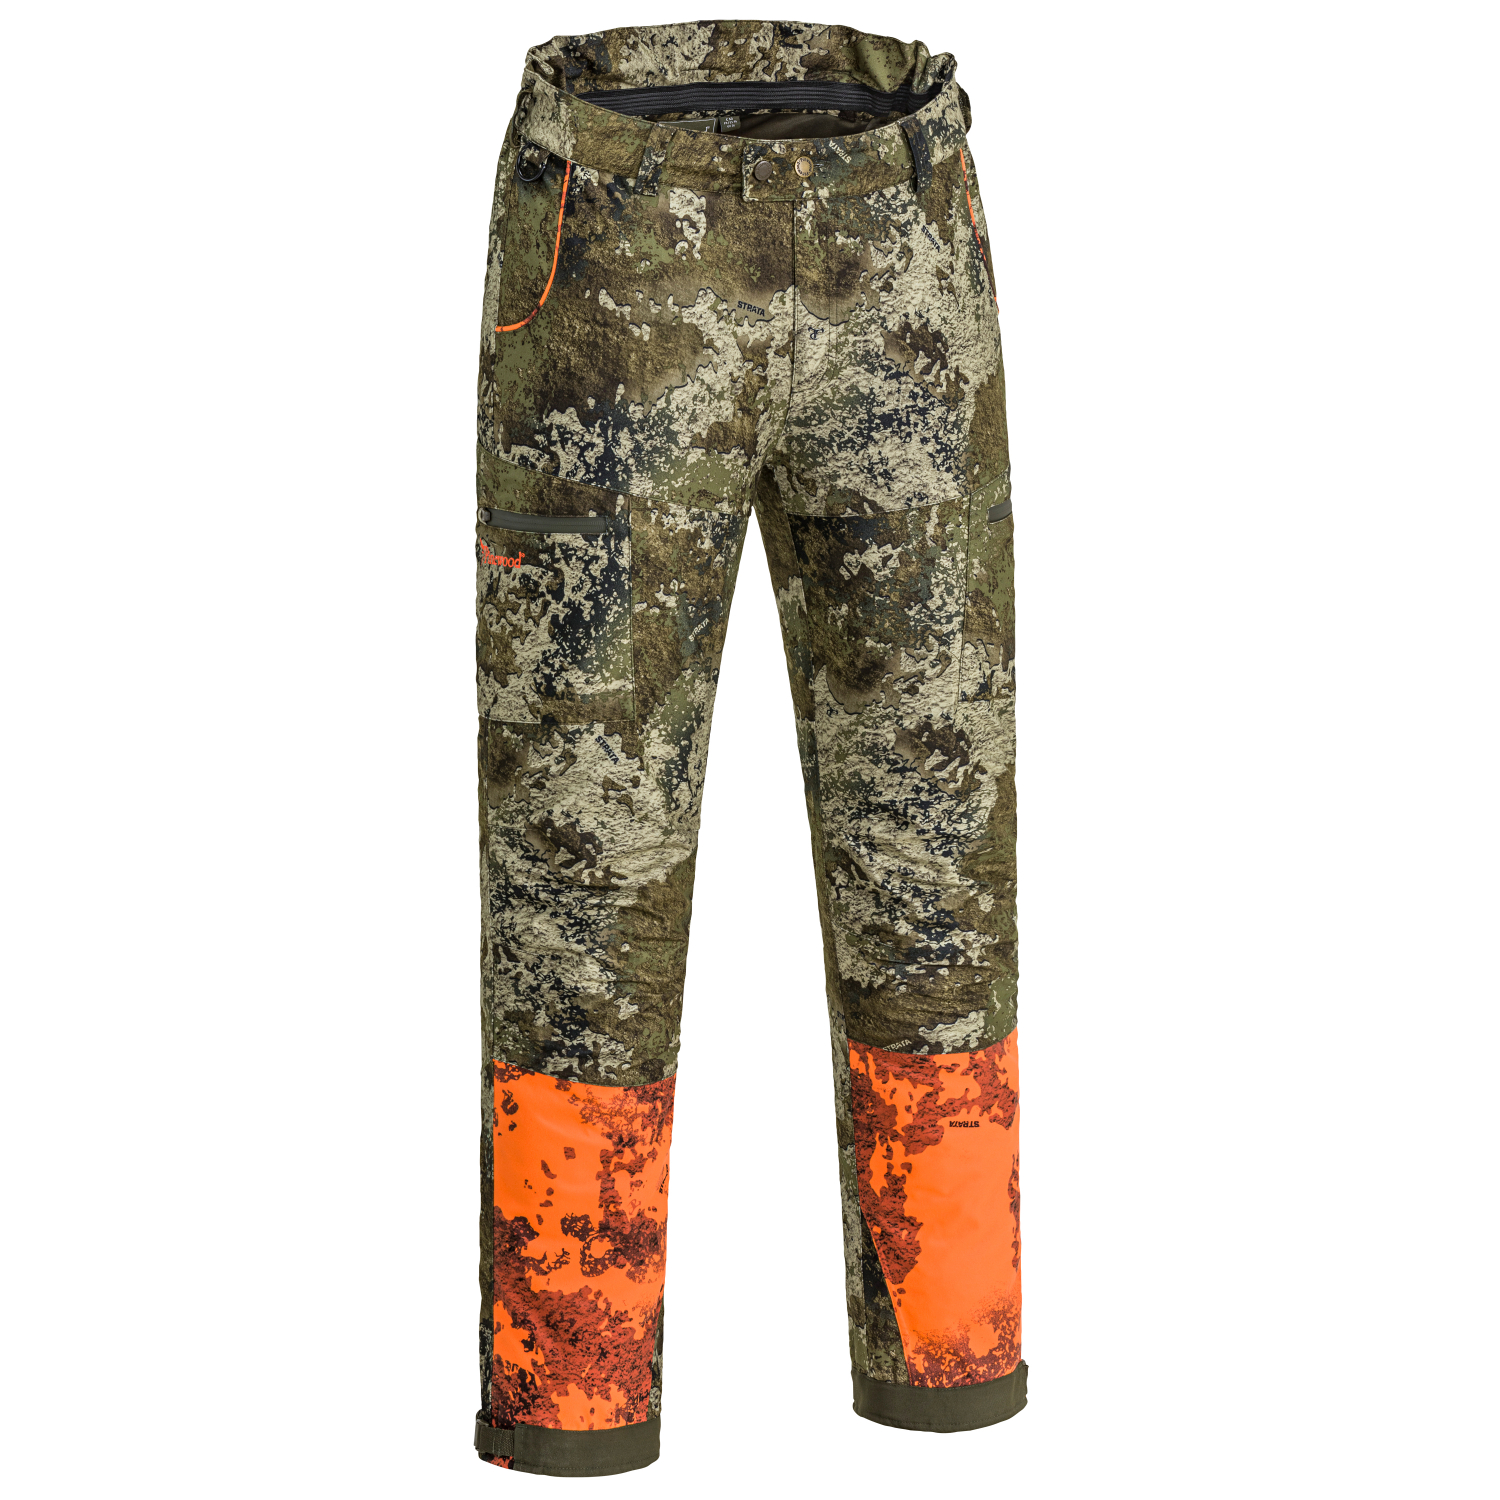 Fjällräven Hunting - Fully focused with the right gear #conscioushunting  Learn more about the Lappland Hybrid Trousers:  https://www.fjallraven.com/uk/en-gb/men/trousers/hunting-trousers /lappland-hybrid-trousers-m | Facebook